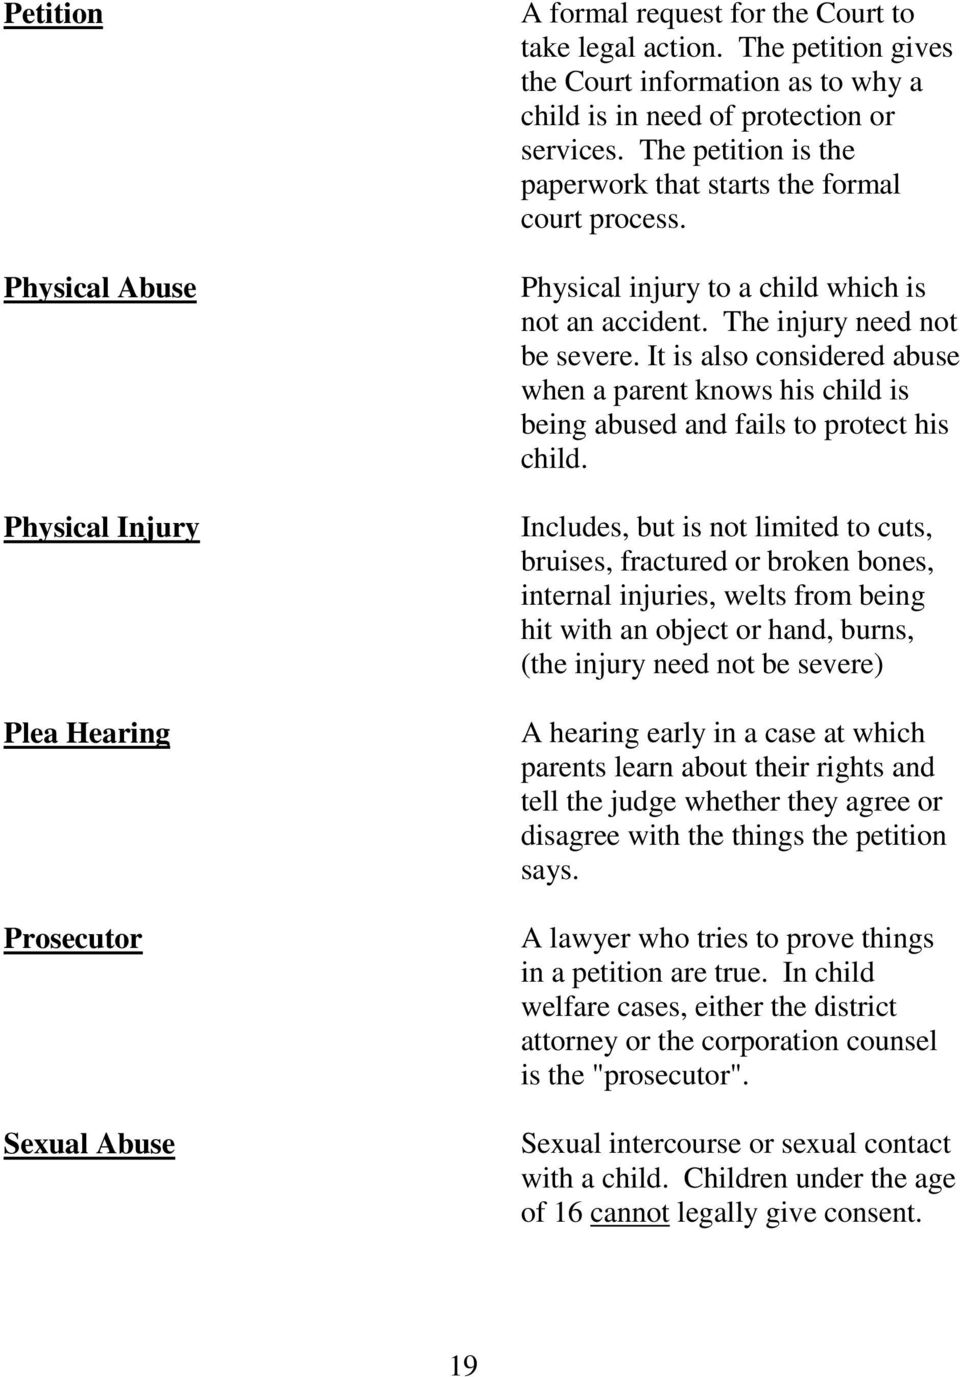 Physical injury to a child which is not an accident. The injury need not be severe. It is also considered abuse when a parent knows his child is being abused and fails to protect his child.